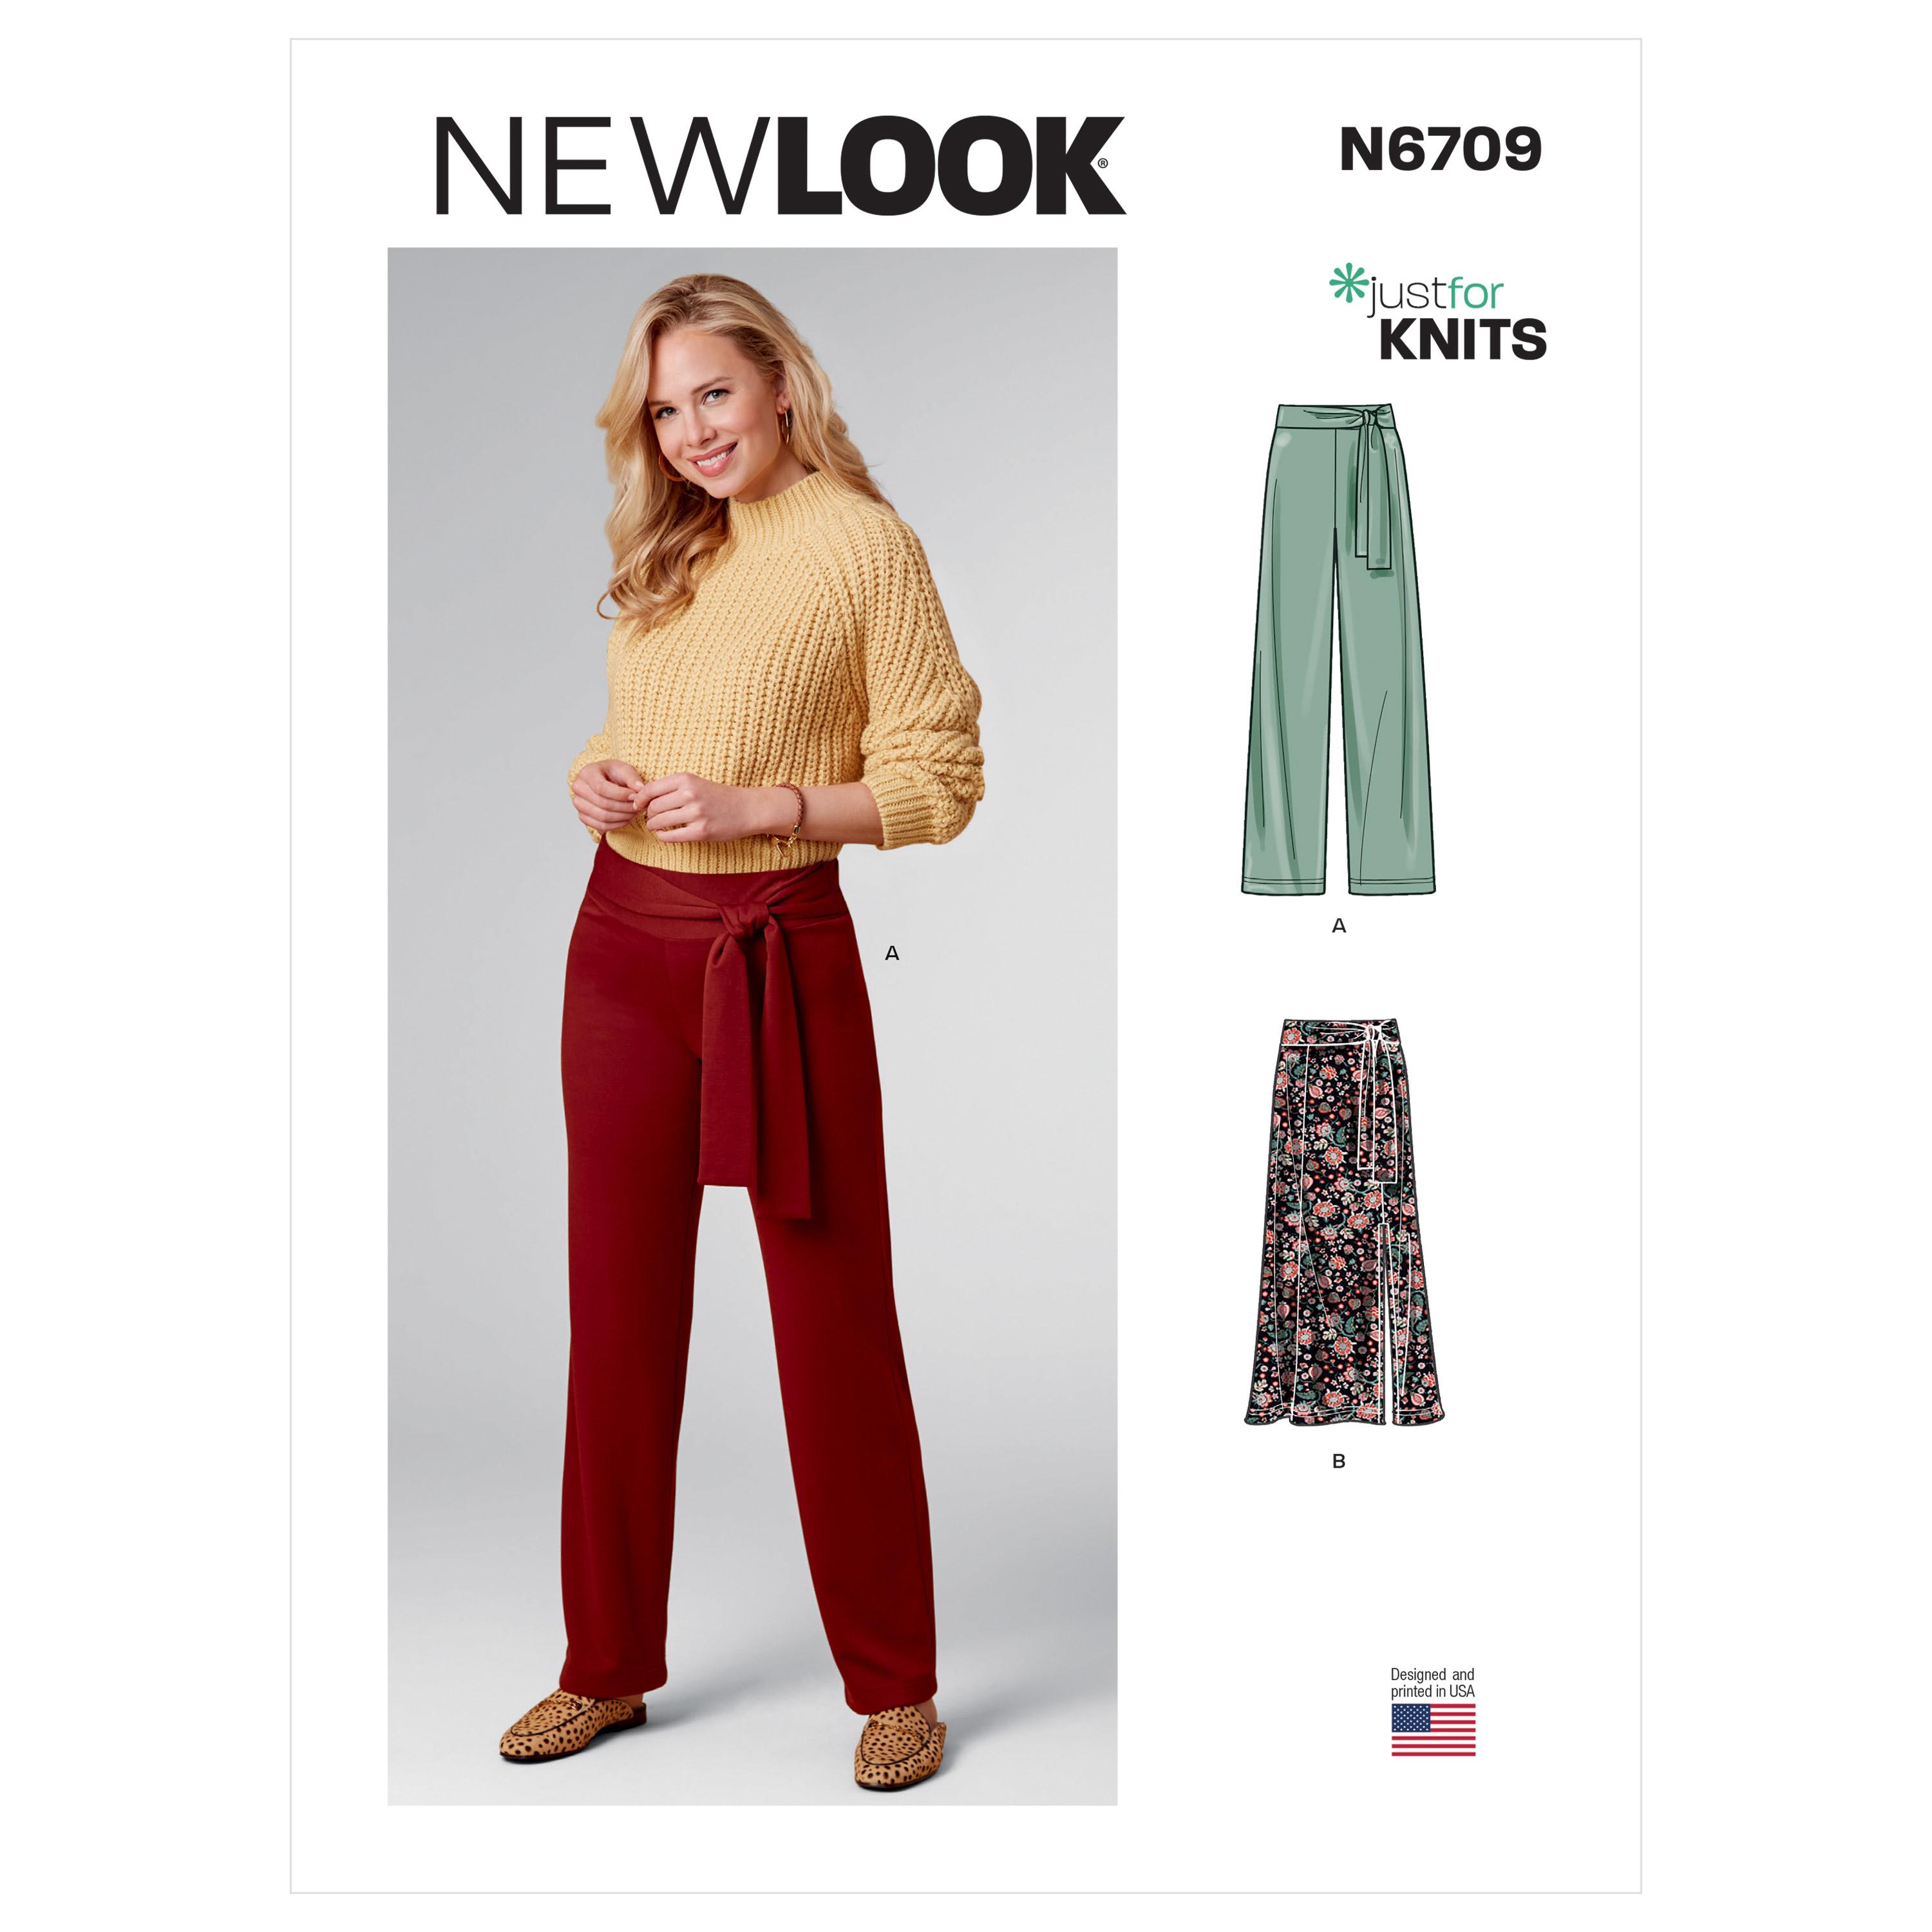 New Look Sewing Pattern N6709 Misses' Knits Only Pants and Skirt